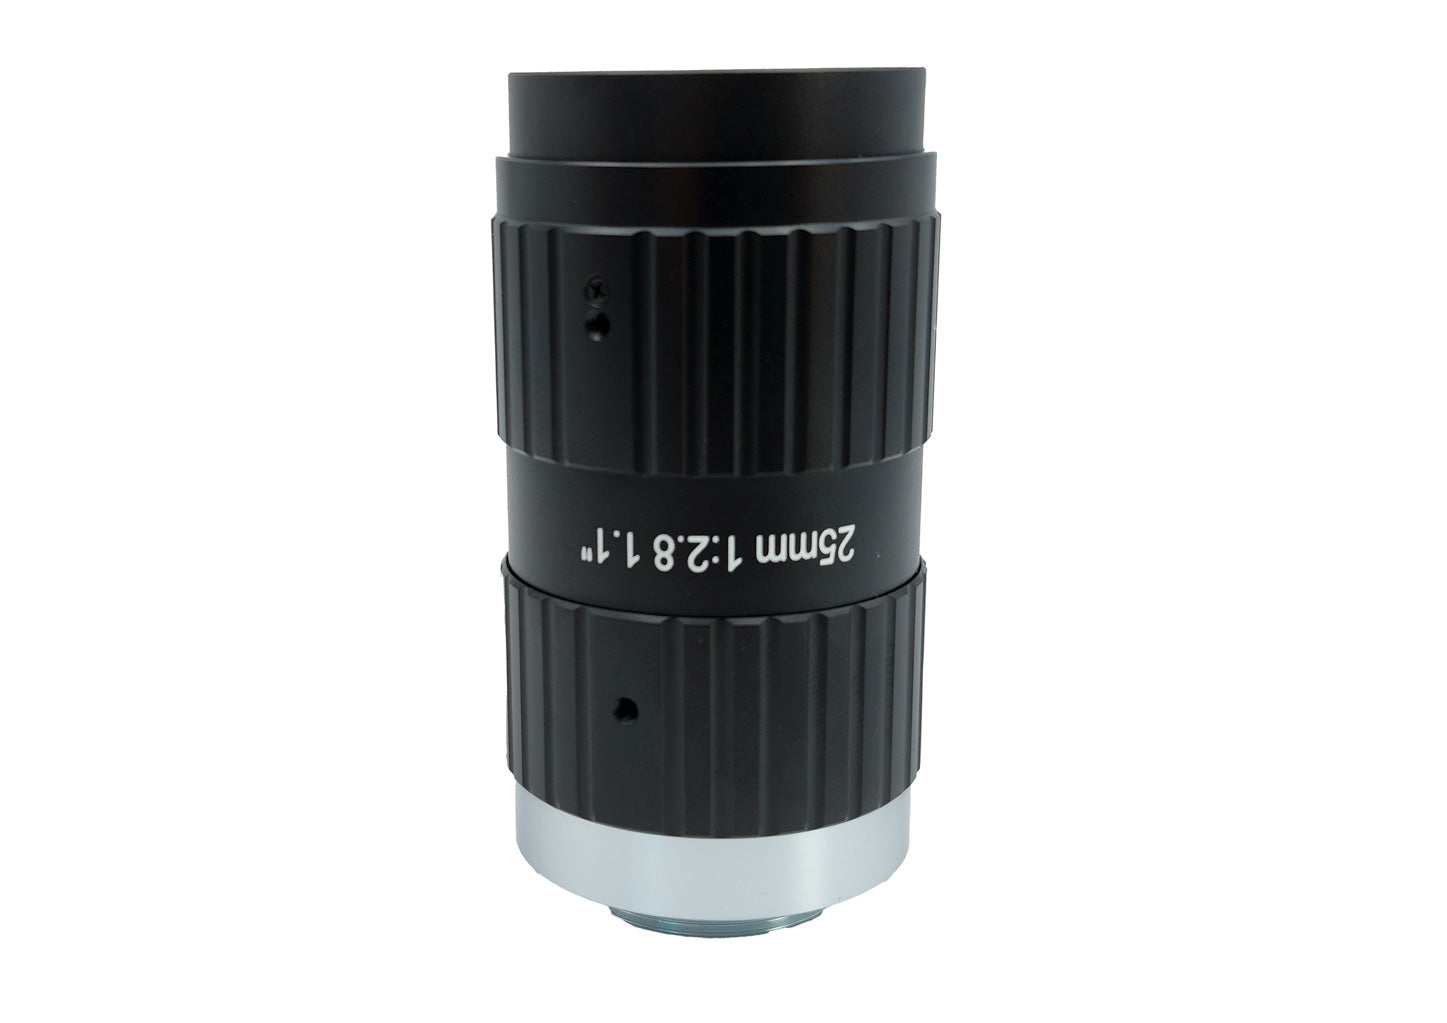 LCM-25MP-25MM-F2.8-1.1-ND1, LENS C-mount, 25MP, 25MM, F2.8, 1.1", NON DISTORTION